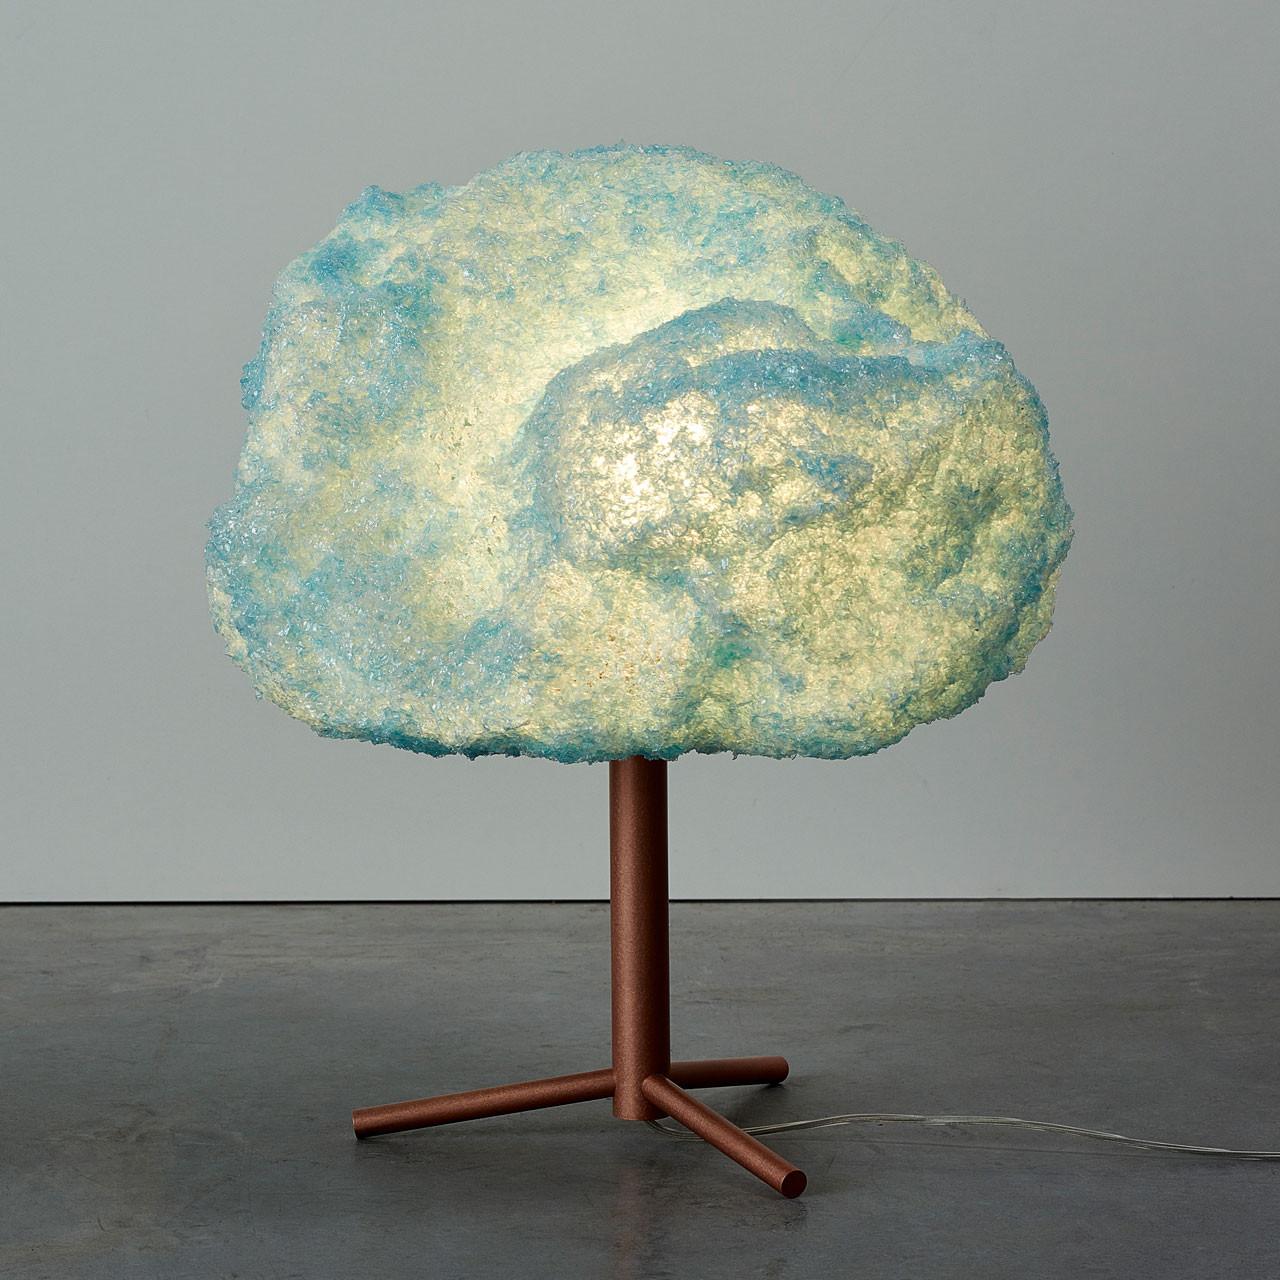 Blue Storm table light copper by Johannes Hemann
Material: Polycarbonate, Walnut
Dimensions: Ø 38 x H 45 cm

The Storm Series is by its concept the purest example of a process-design, where the designer seeks to set creative parameters to allow